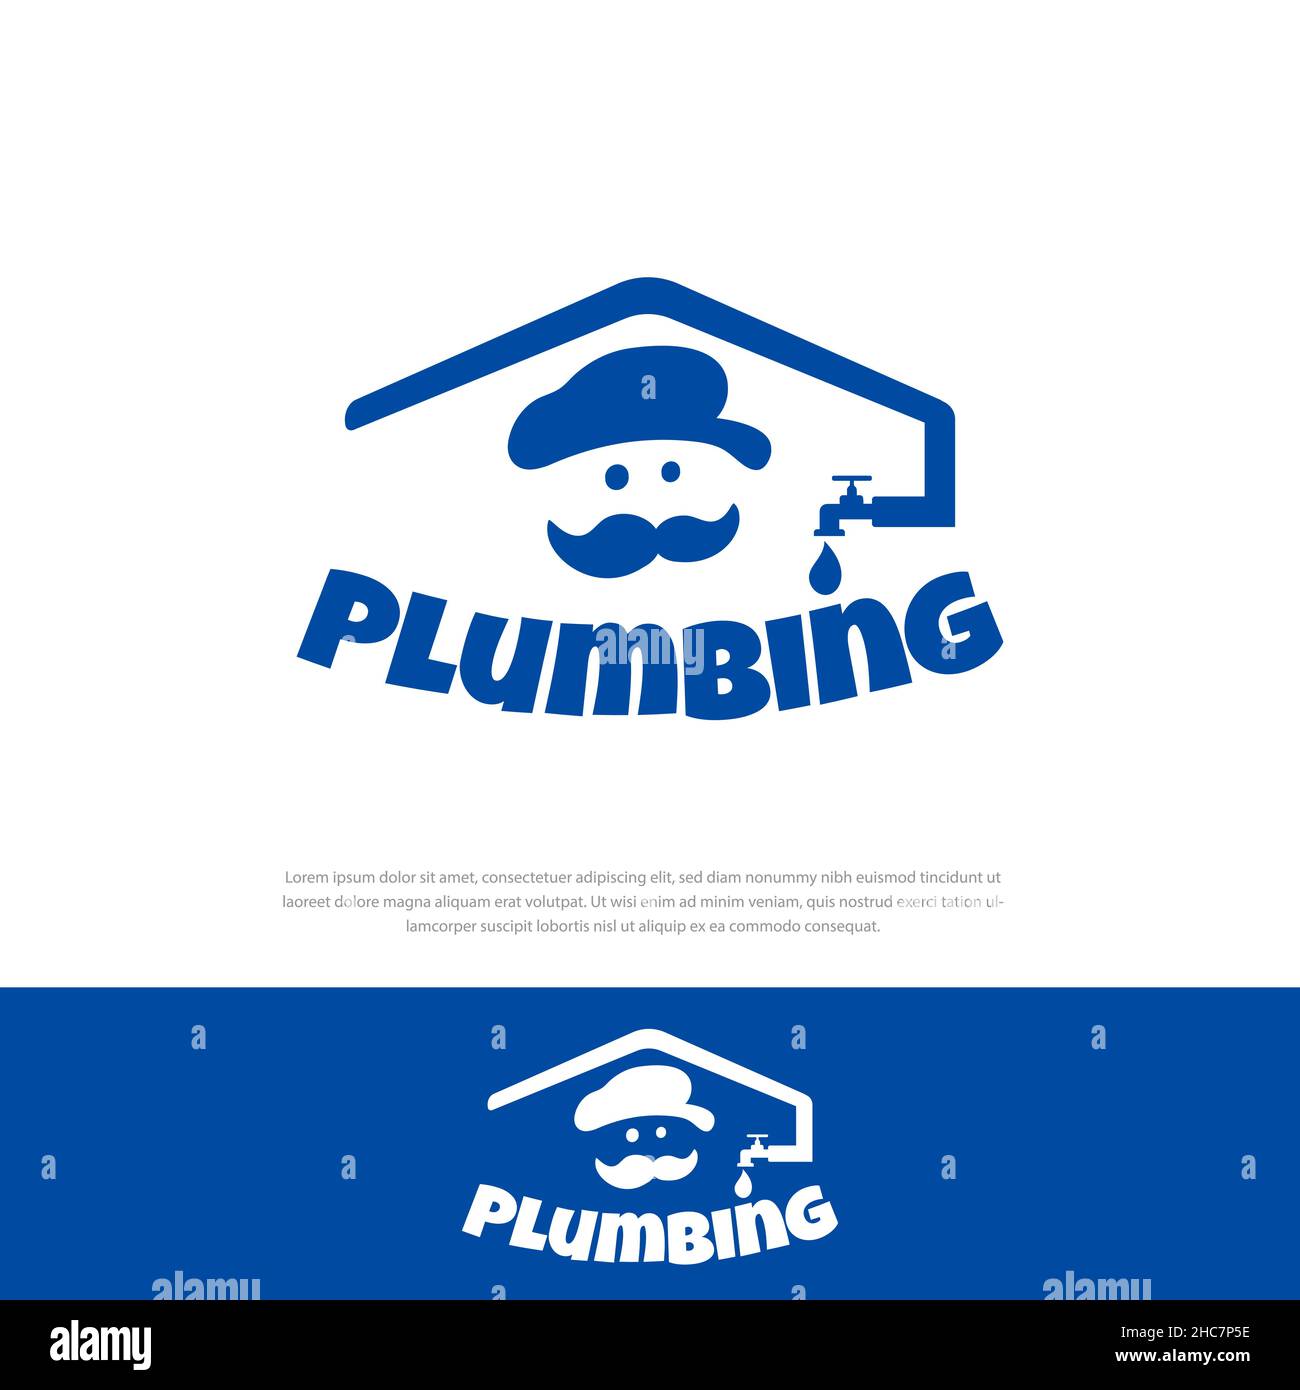 Home plumber logo, icon head plumber wearing a hat with a thick mustache.symbol,icon,illustration,design template Stock Vector